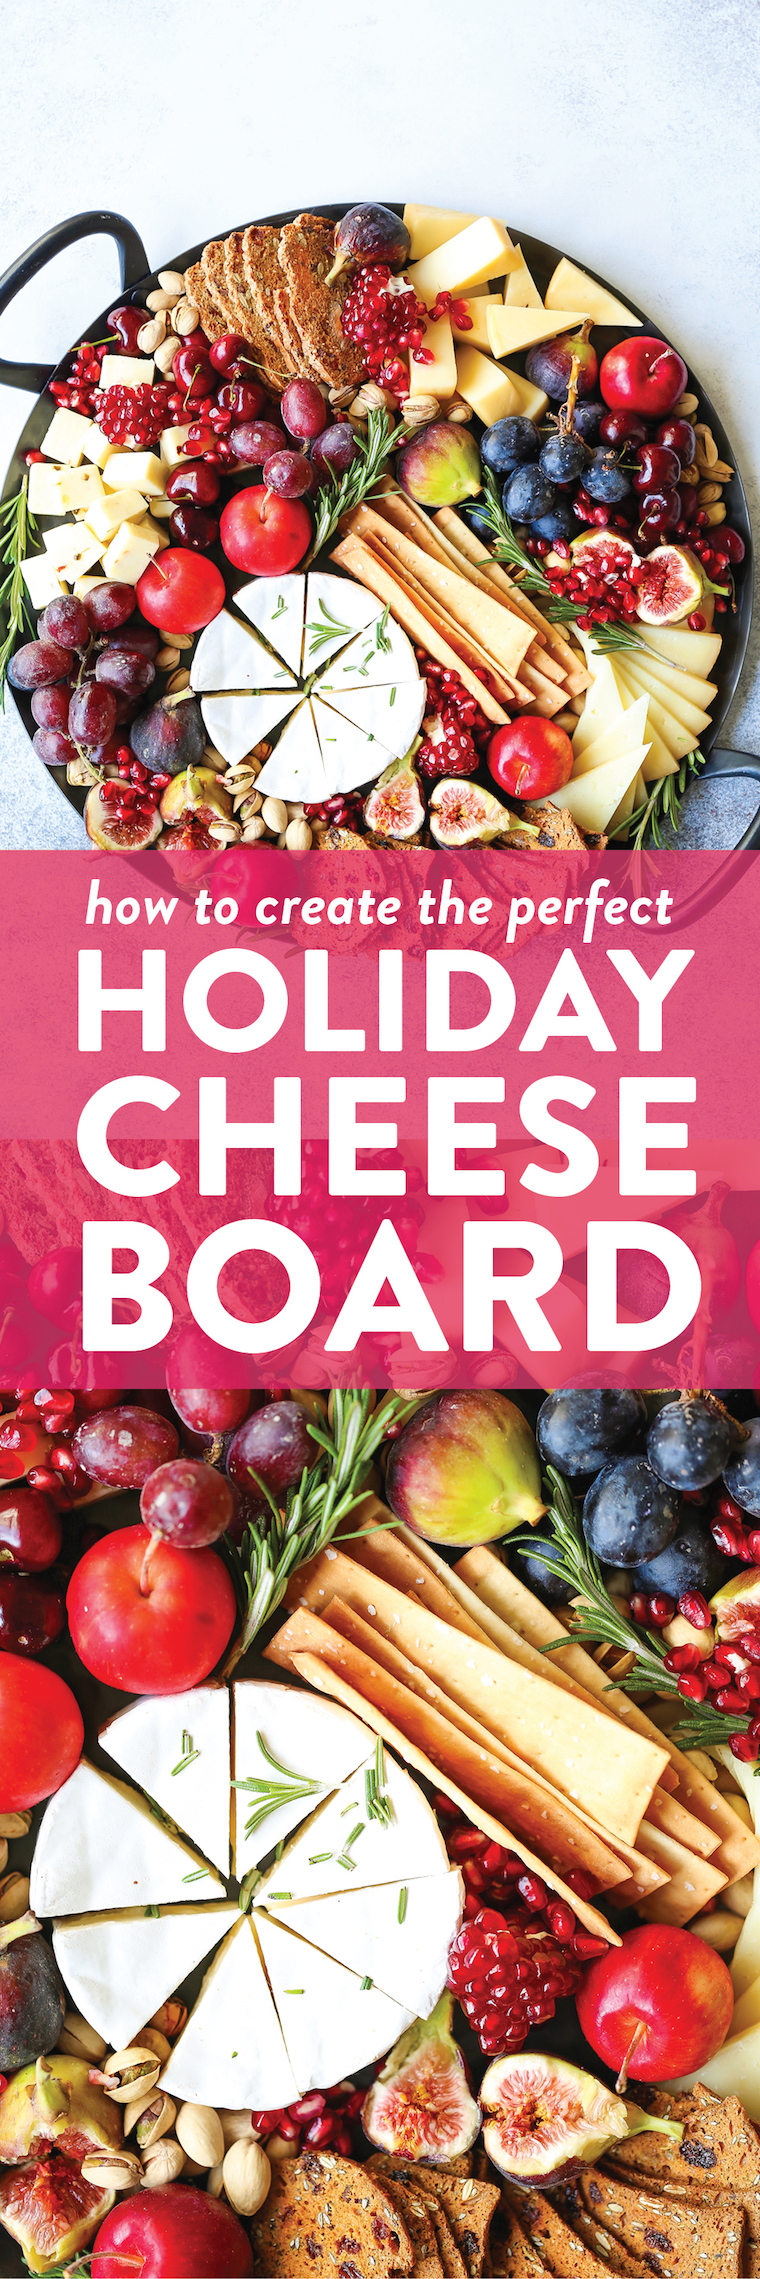 Holiday Cheese Board - The most EPIC appetizer board ever! With an assortment of cheeses, figs, nuts, and pomegranate, this is the must-have holiday recipe!